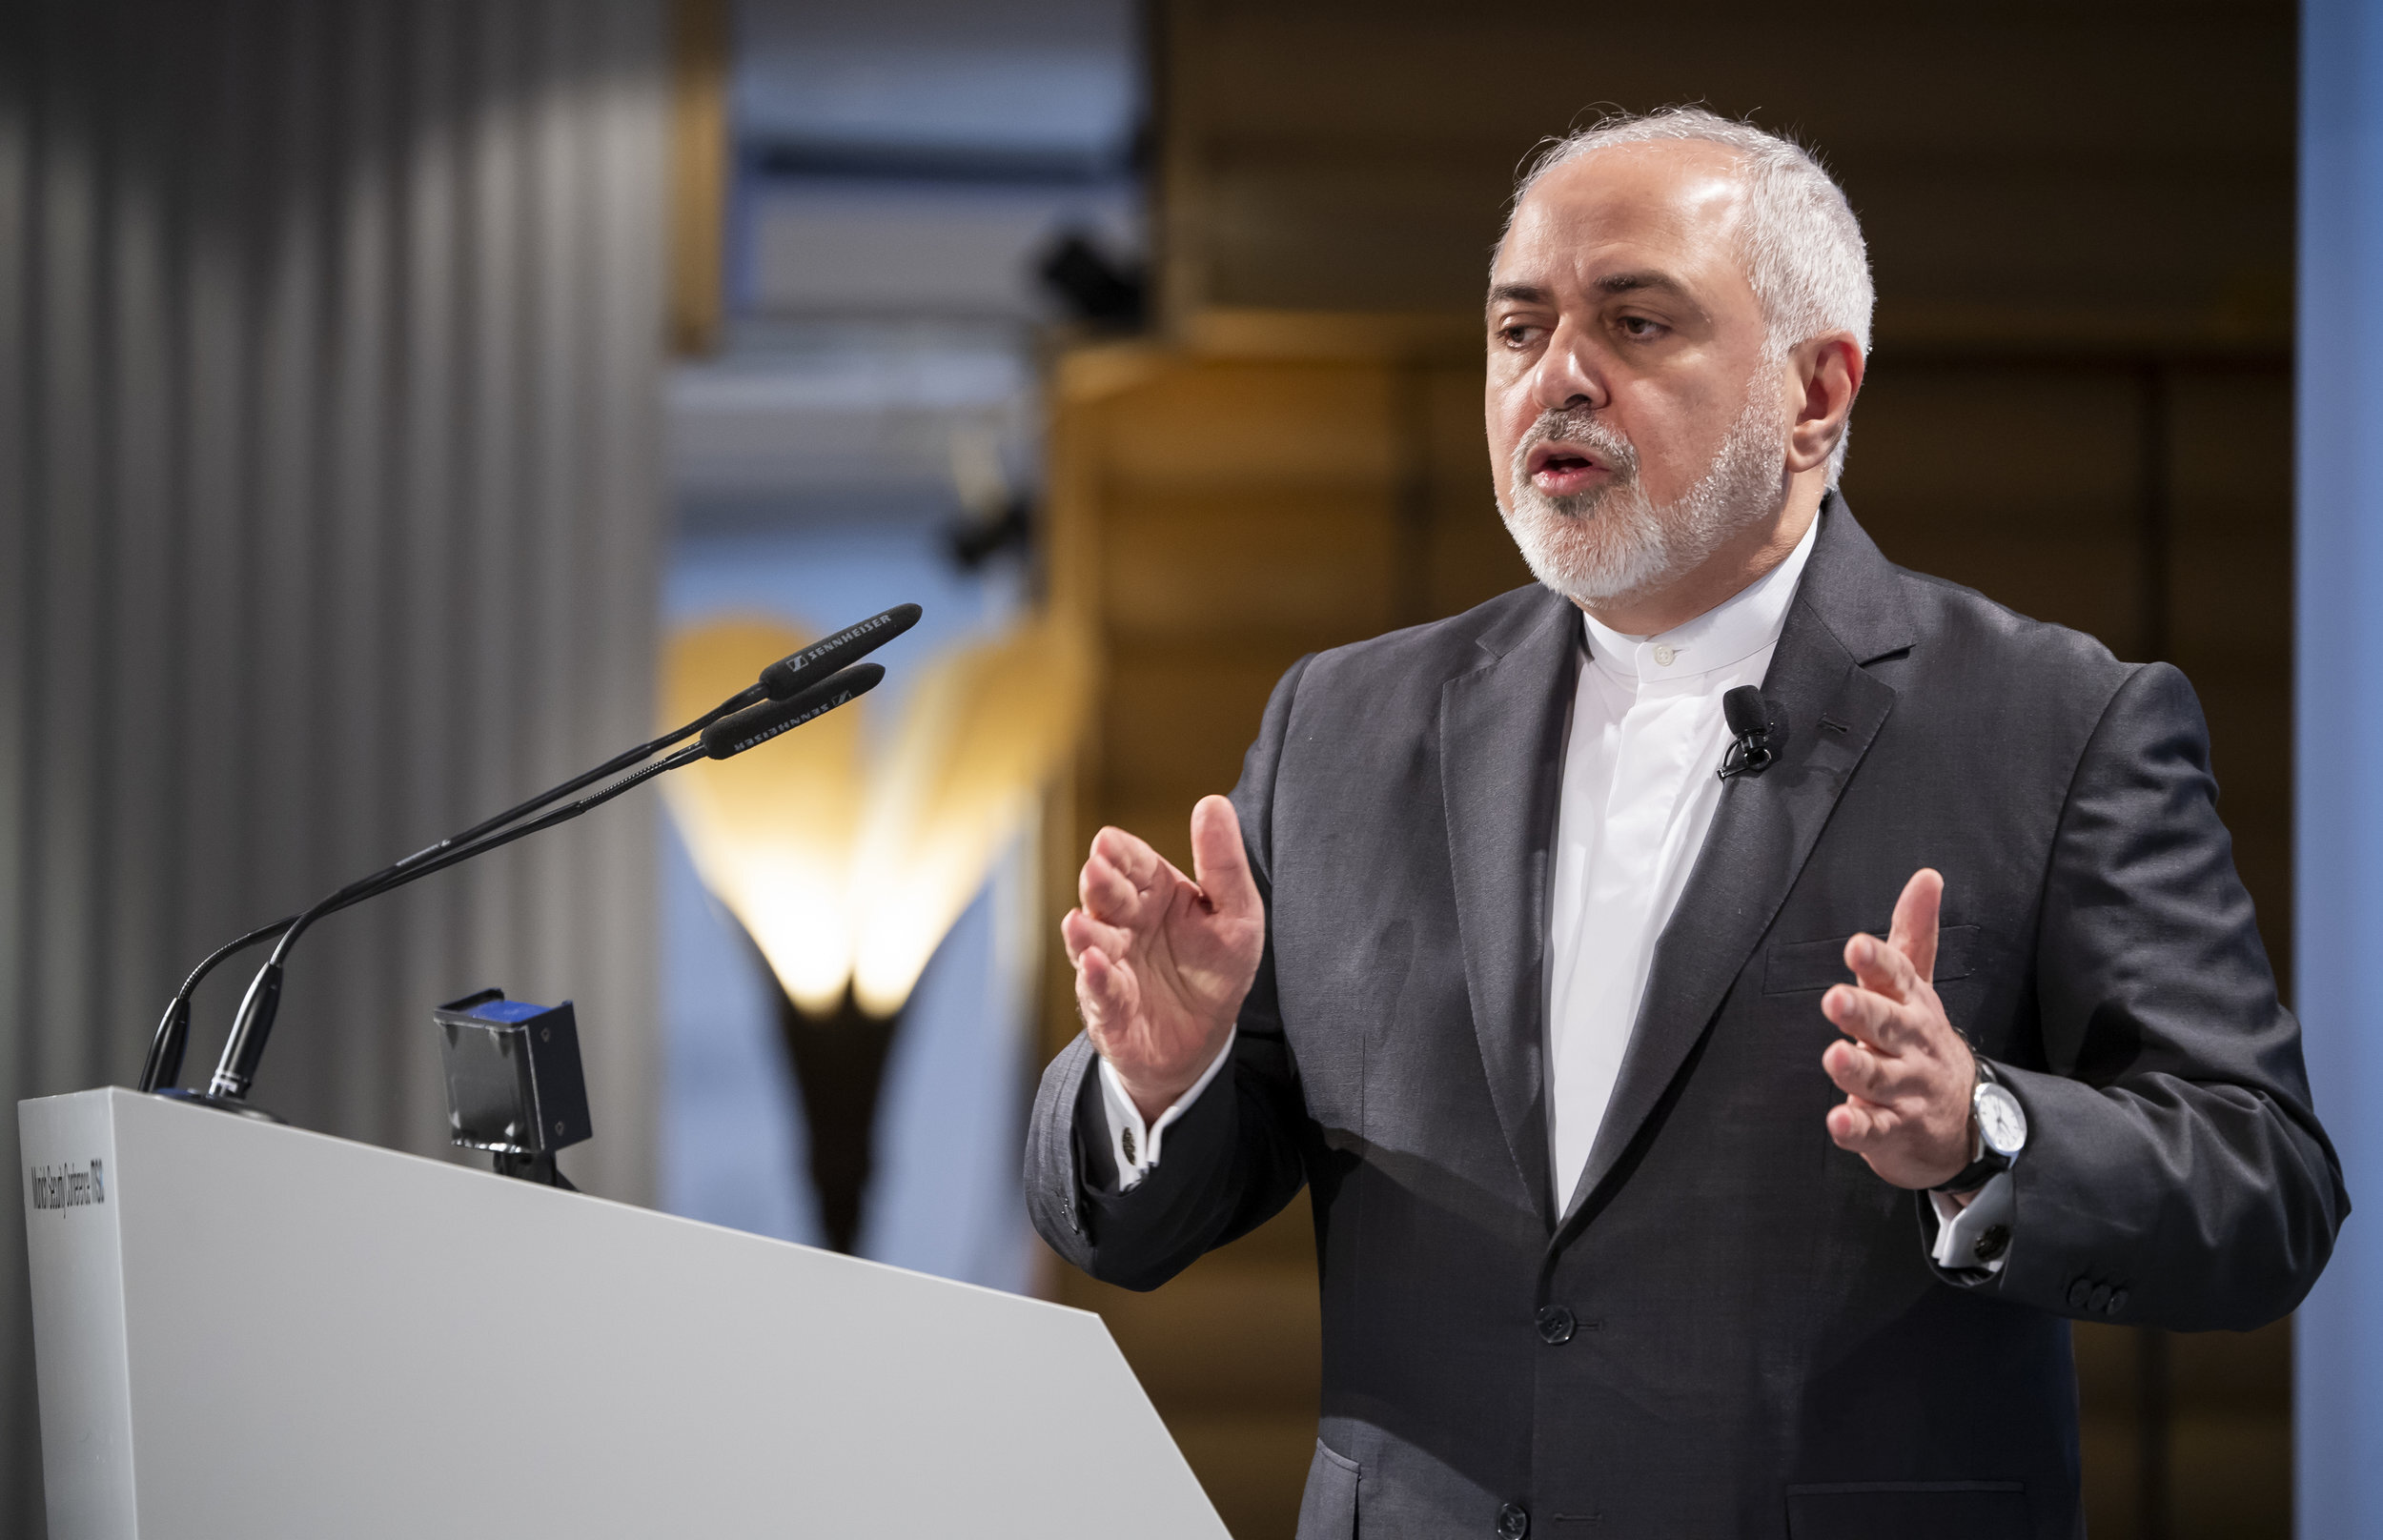 PICTURED: Mohammad Javad Zarif during the Munich Security Conference 2019. The Minister described Pompeo’s rhetoric as “warmongering lies”. Photo credit Wikimedia Commons, CC license, Germany.